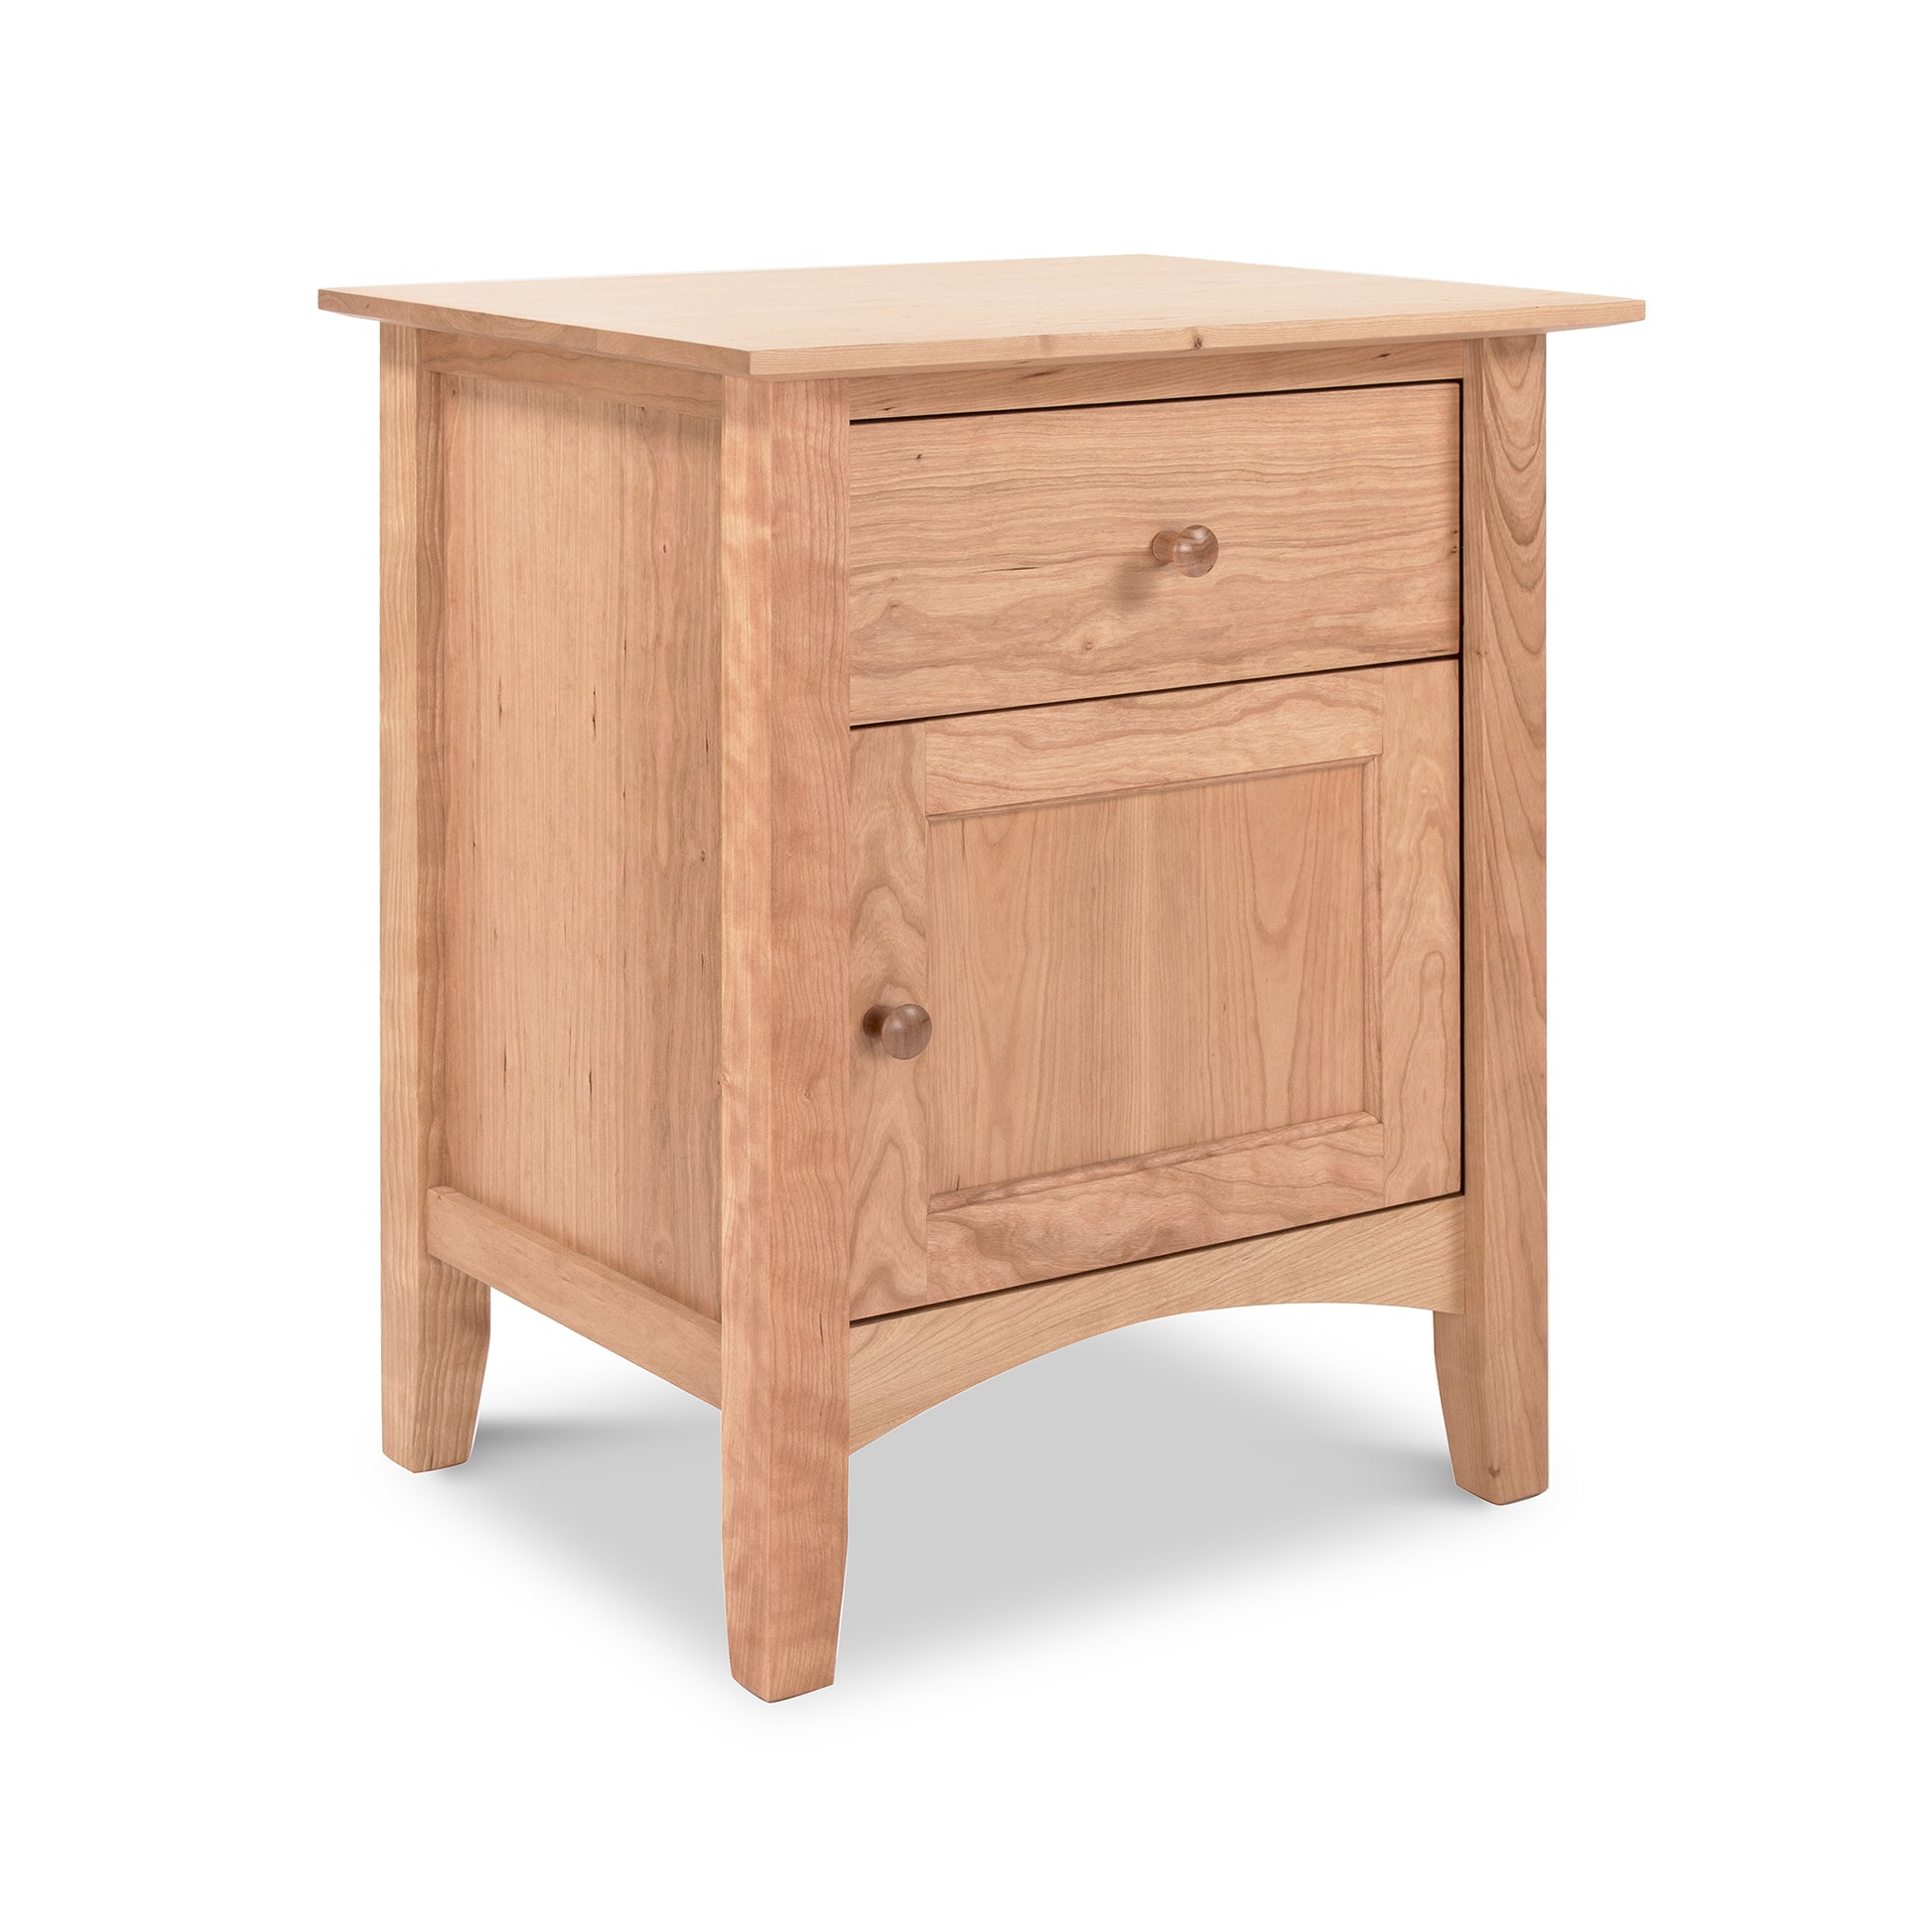 A Maple Corner Woodworks American Shaker 1-Drawer Nightstand with Door, featuring sustainably harvested wood, displayed against a white background.